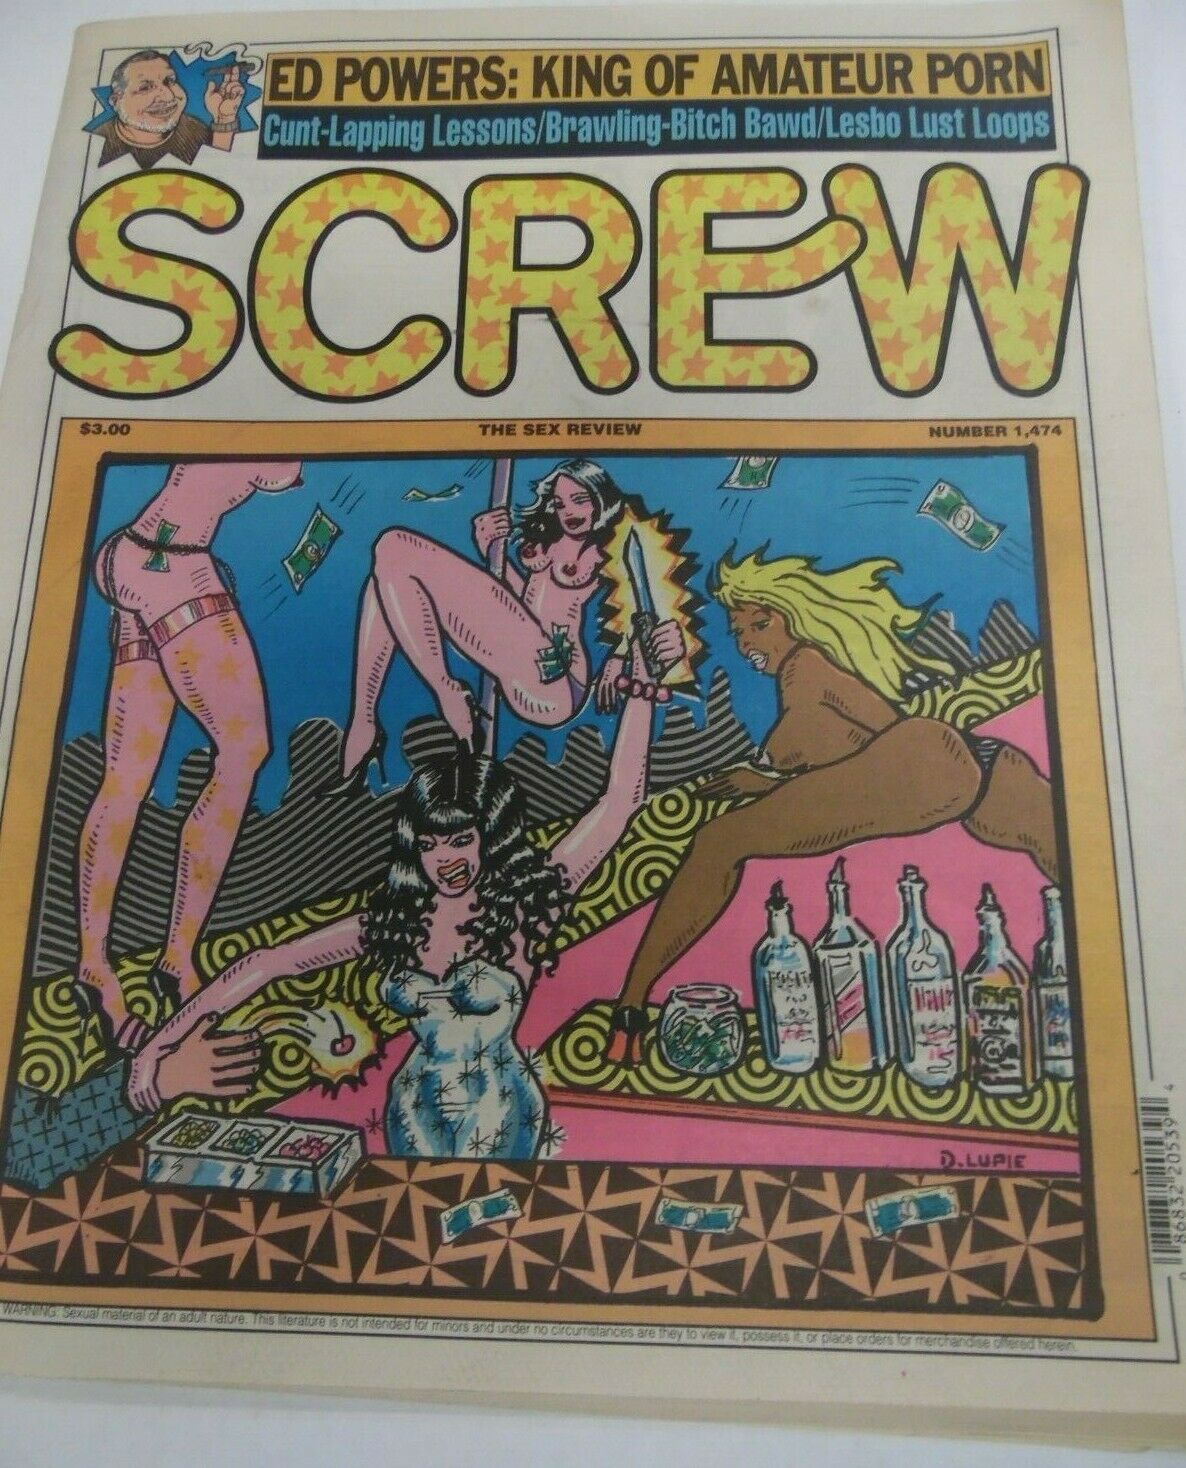 Screw Newspaper Ed Powers King Of Amateur Porn #1474 June 2 121419lm-e pic pic